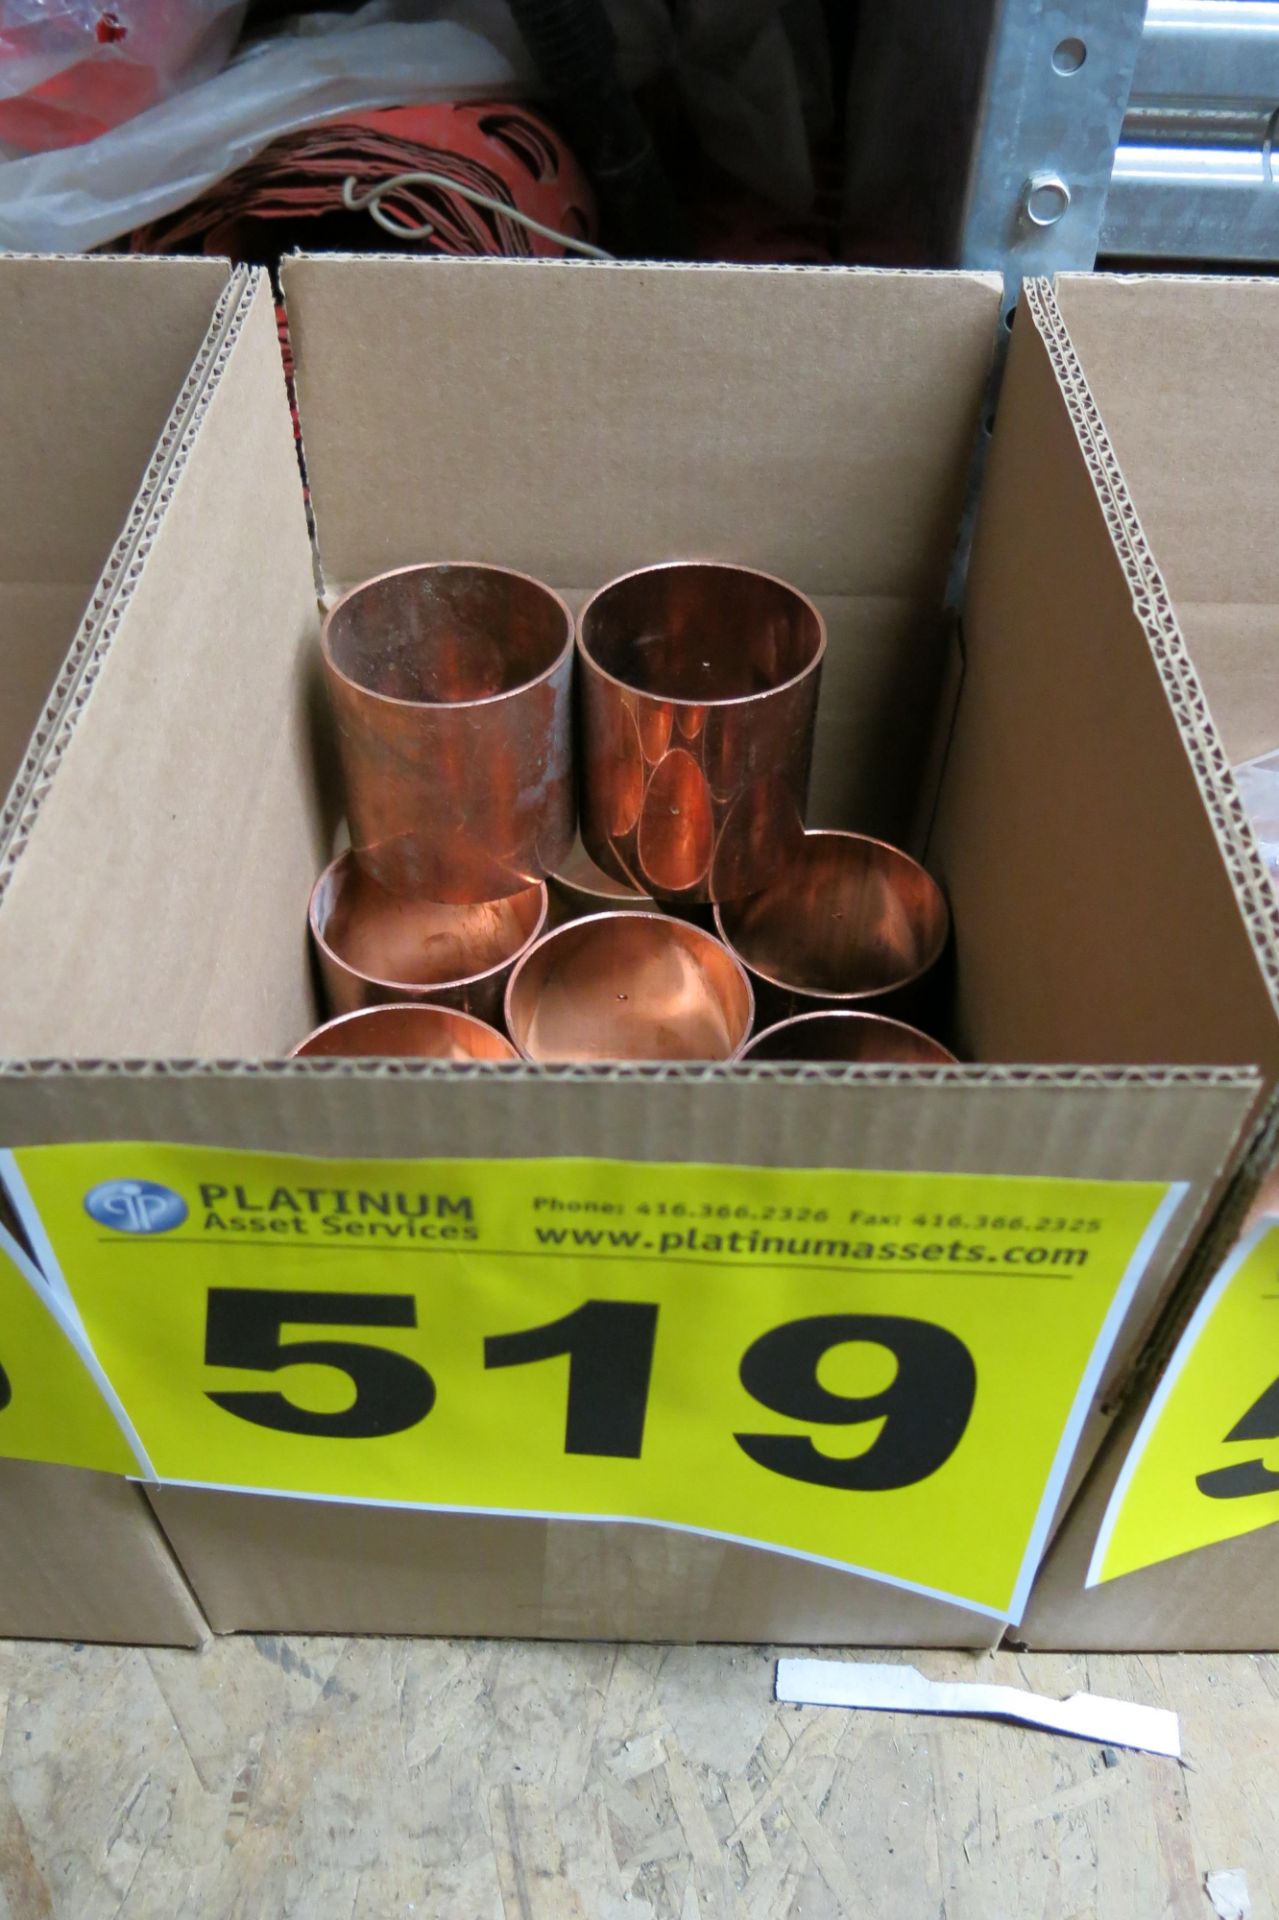 LOT OF COPPER PIPE COUPLINGS - NEW (LOCATED IN MISSISSAUGA)